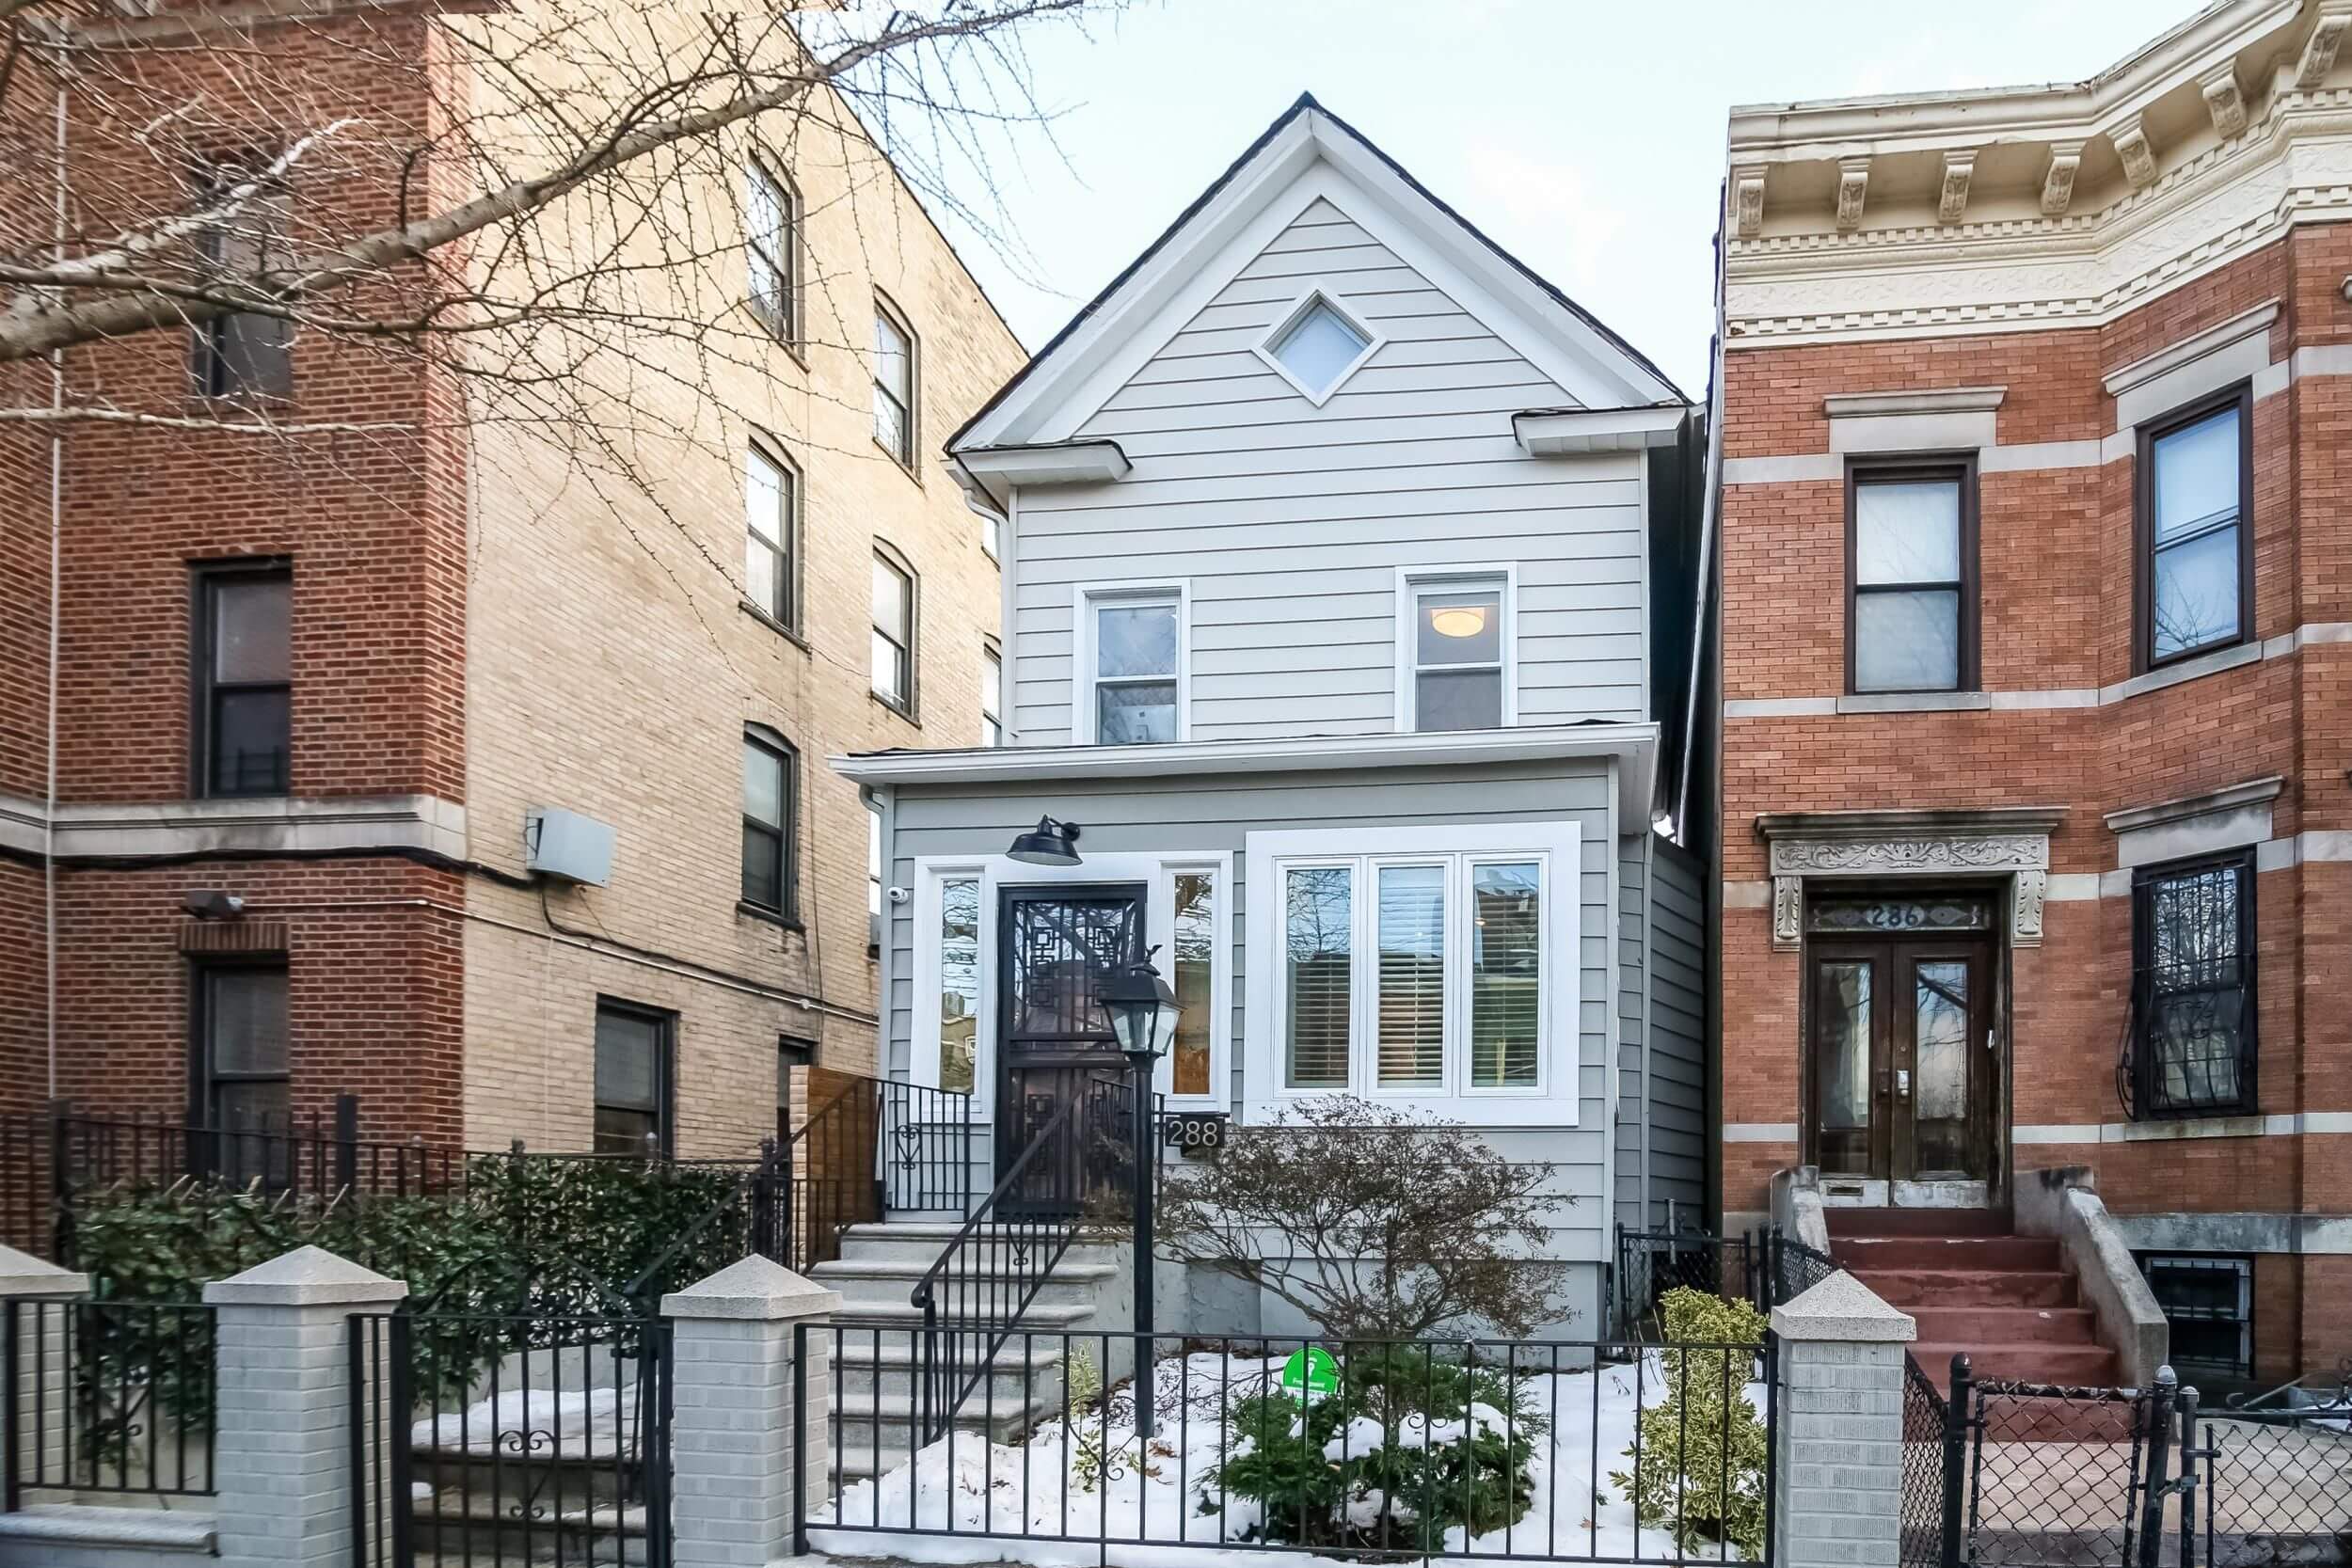 Brooklyn Homes for Sale in Clinton Hill, Bed Stuy, Prospect Lefferts Gardens, Crown Heights